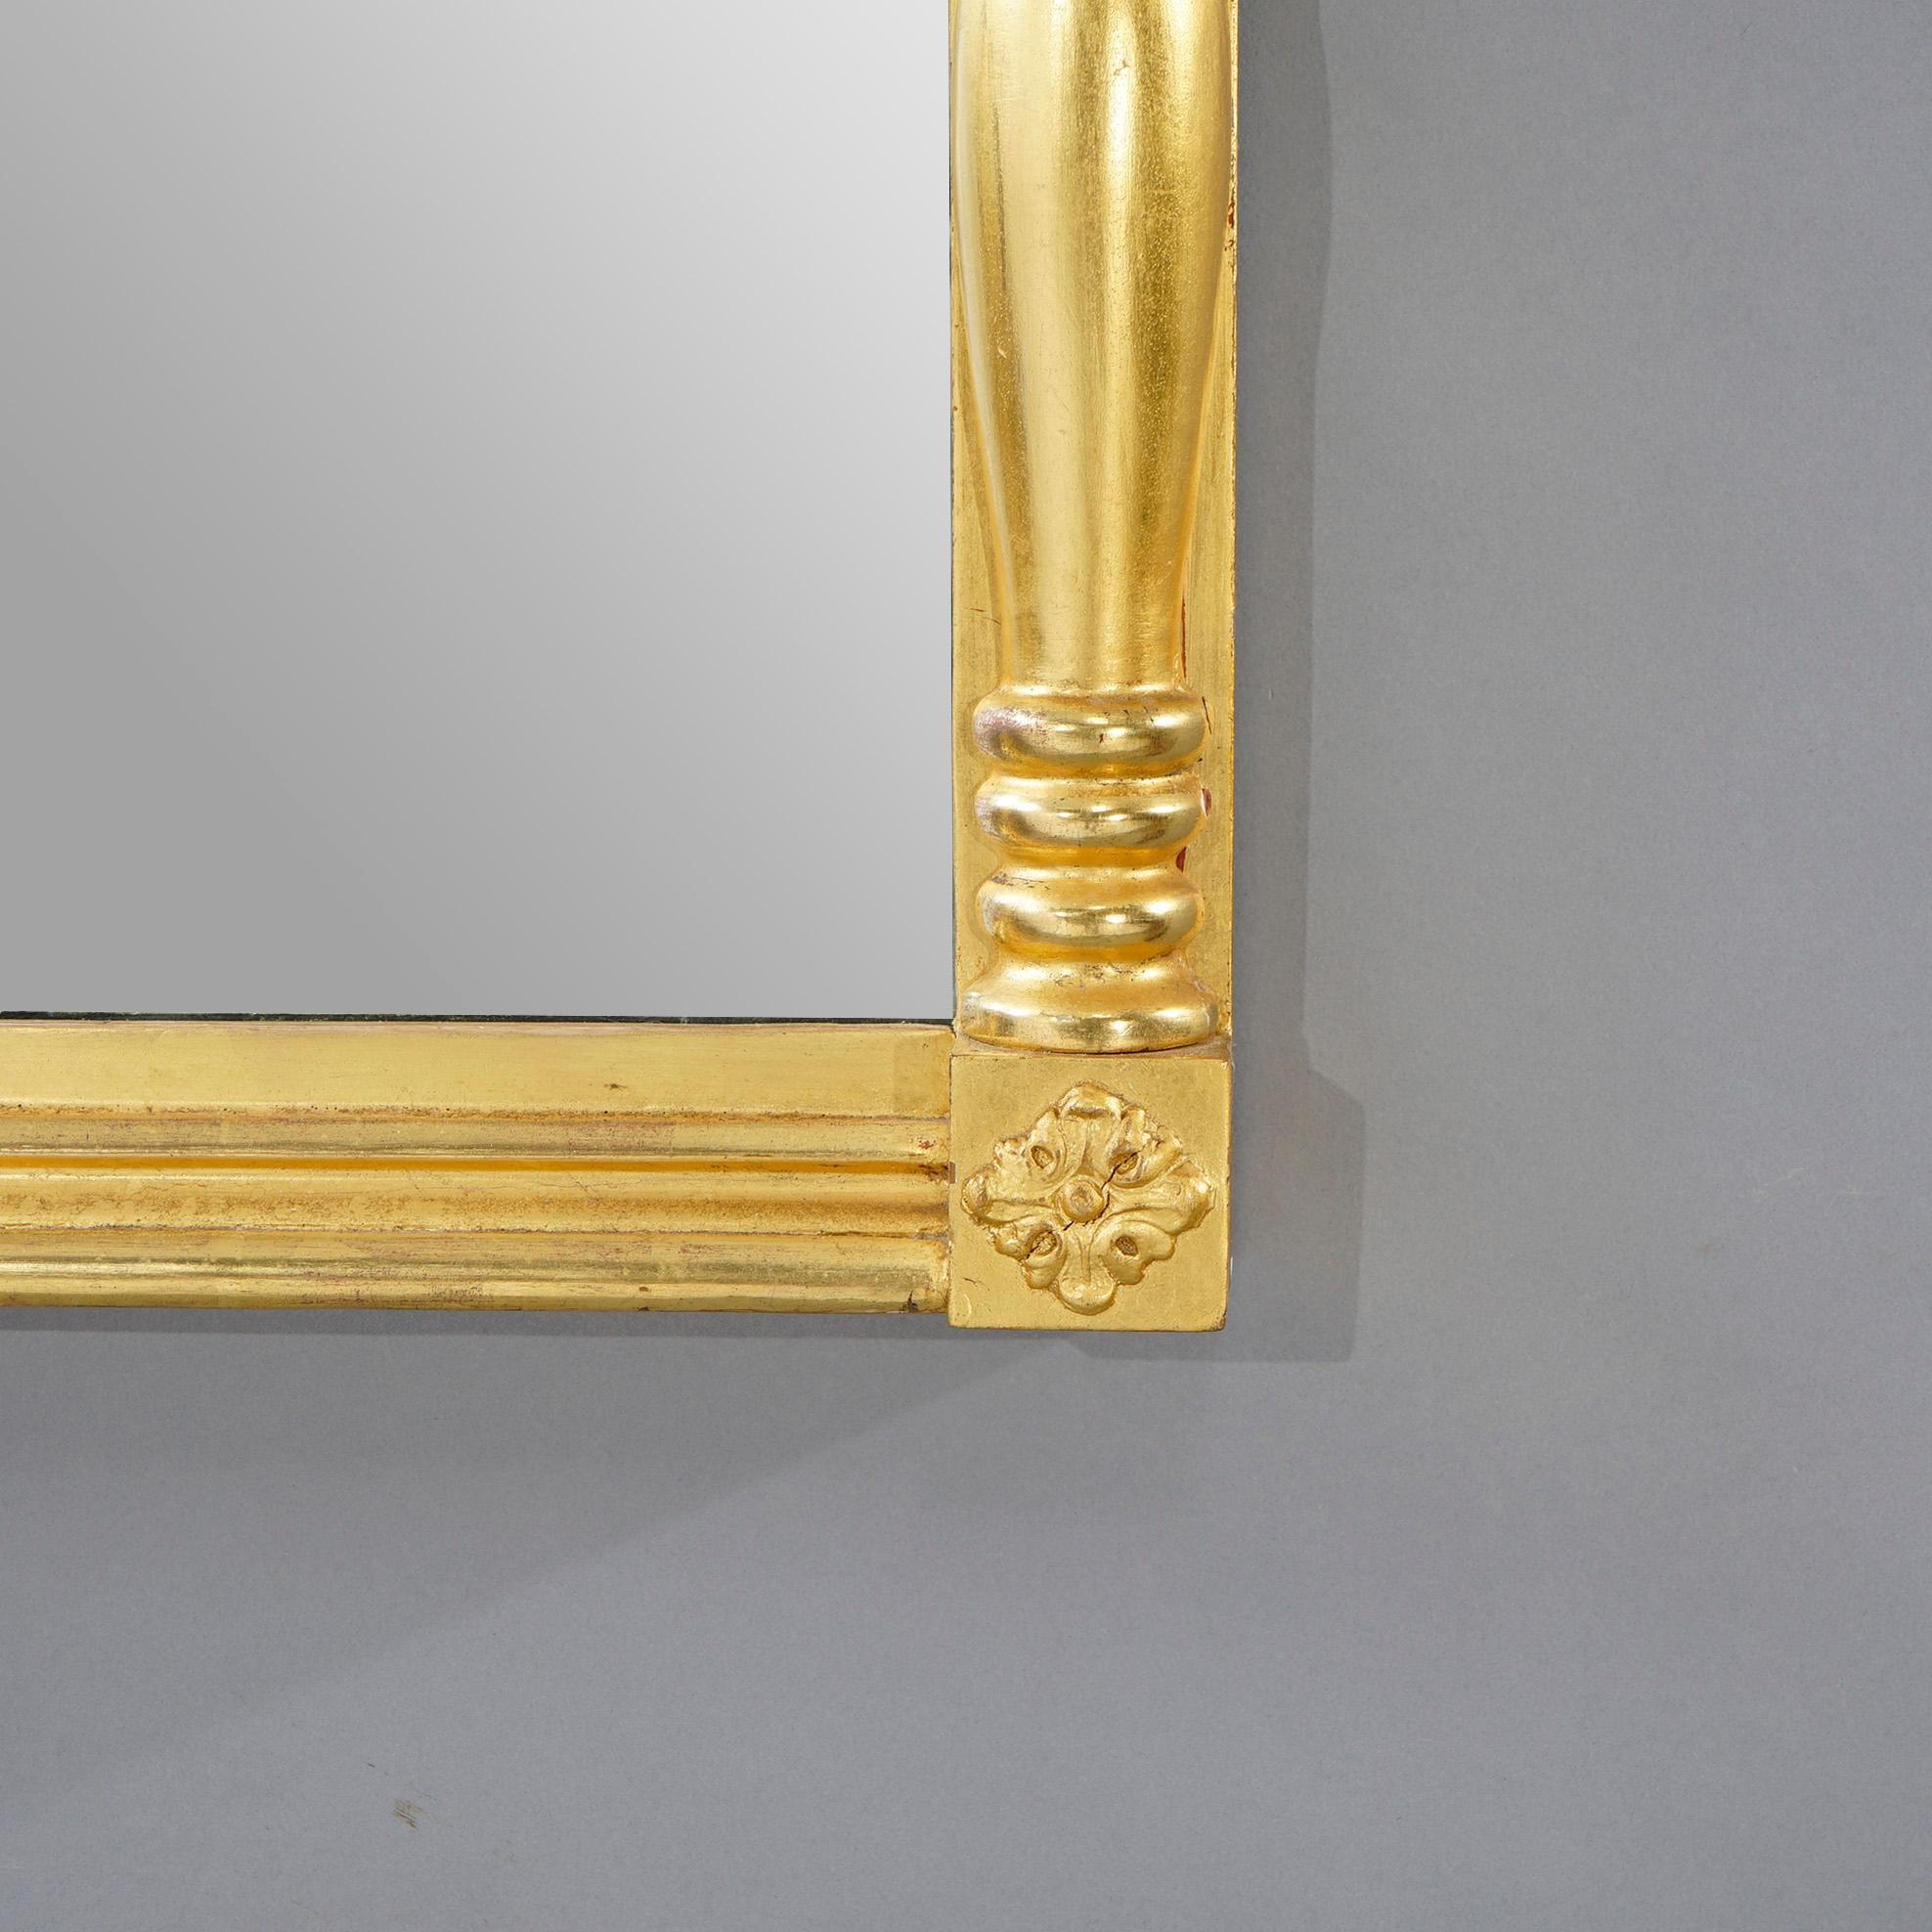 Antique Empire Reverse Painted Still Life Giltwood Trumeau Wall Mirror 19th C For Sale 8